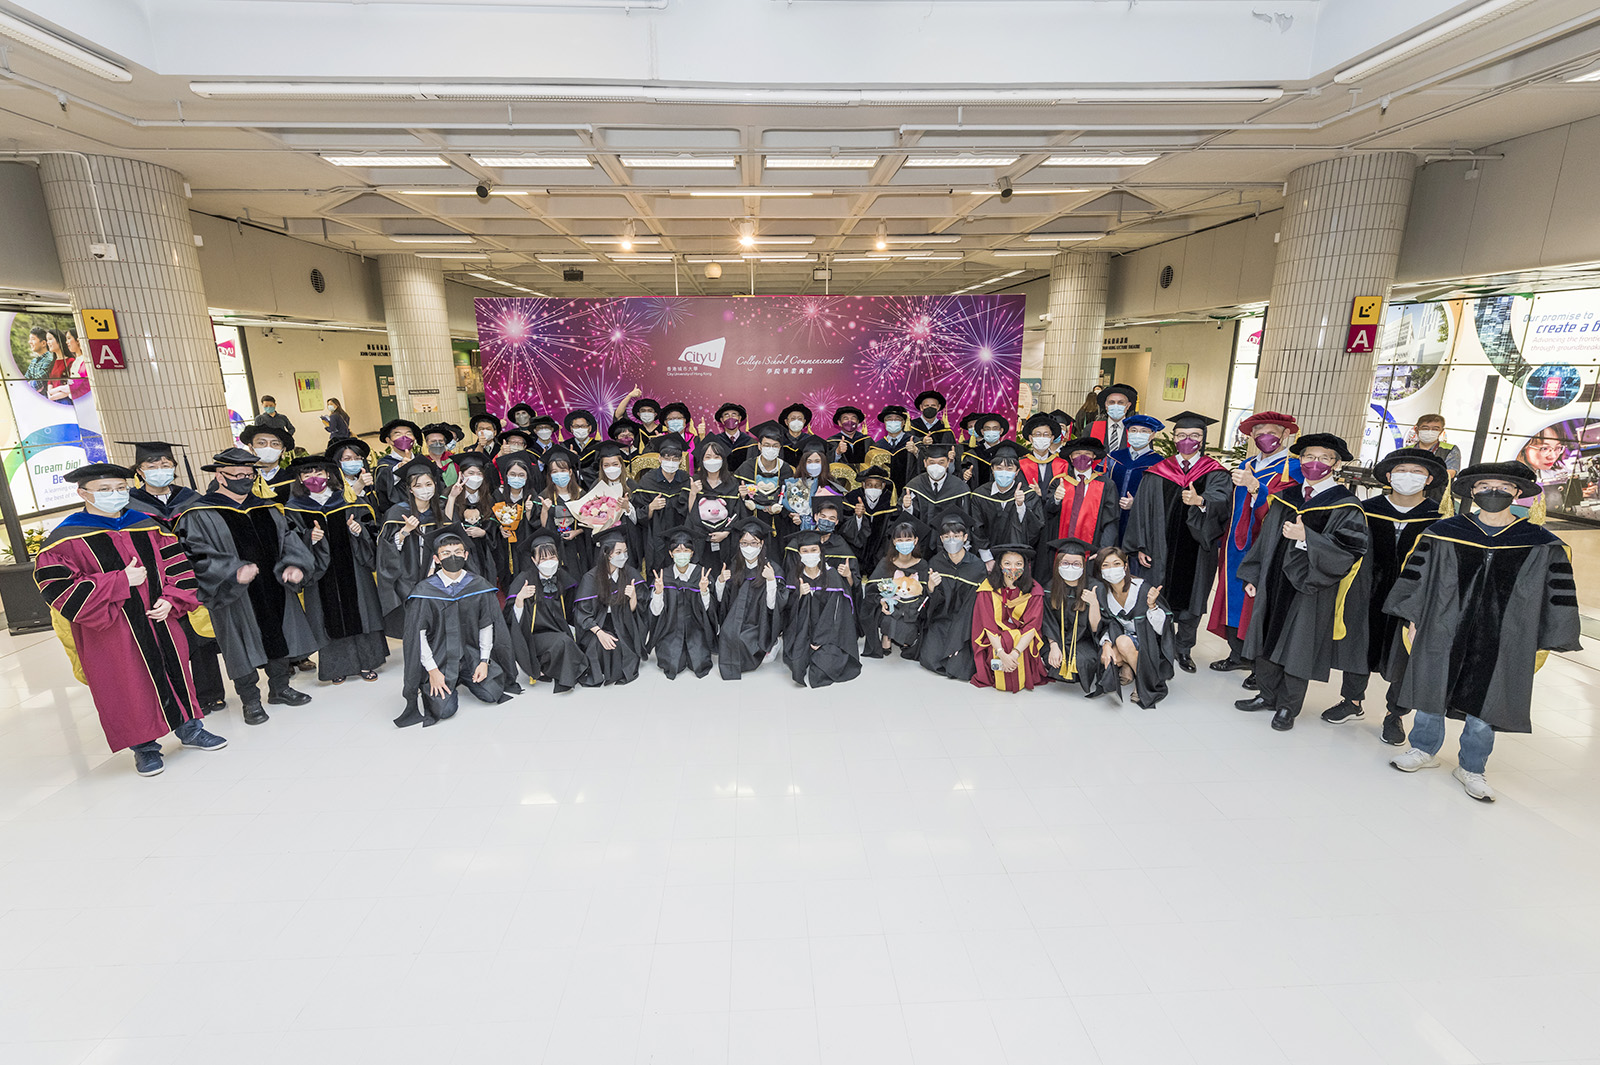 The average annual salary for CityU graduates increased by around 16% compared to last year’s figures, which is the highest increment among the eight universities for 2021. 